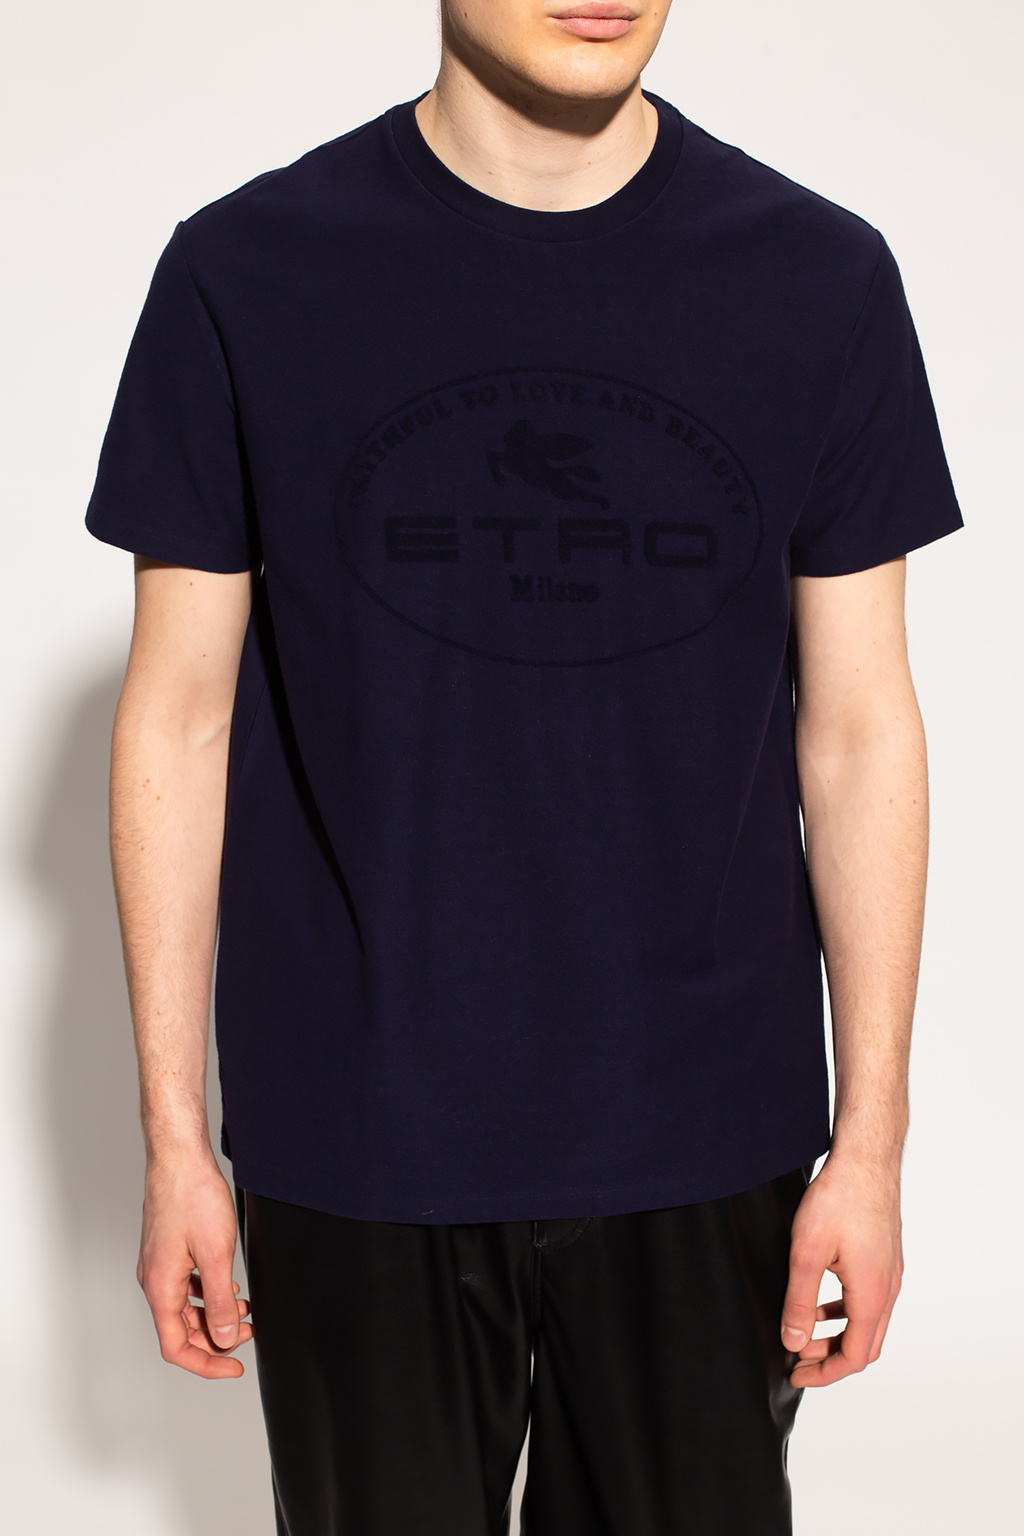 Etro One & Only Boxed Front Back Short Sleeve T-Shirt